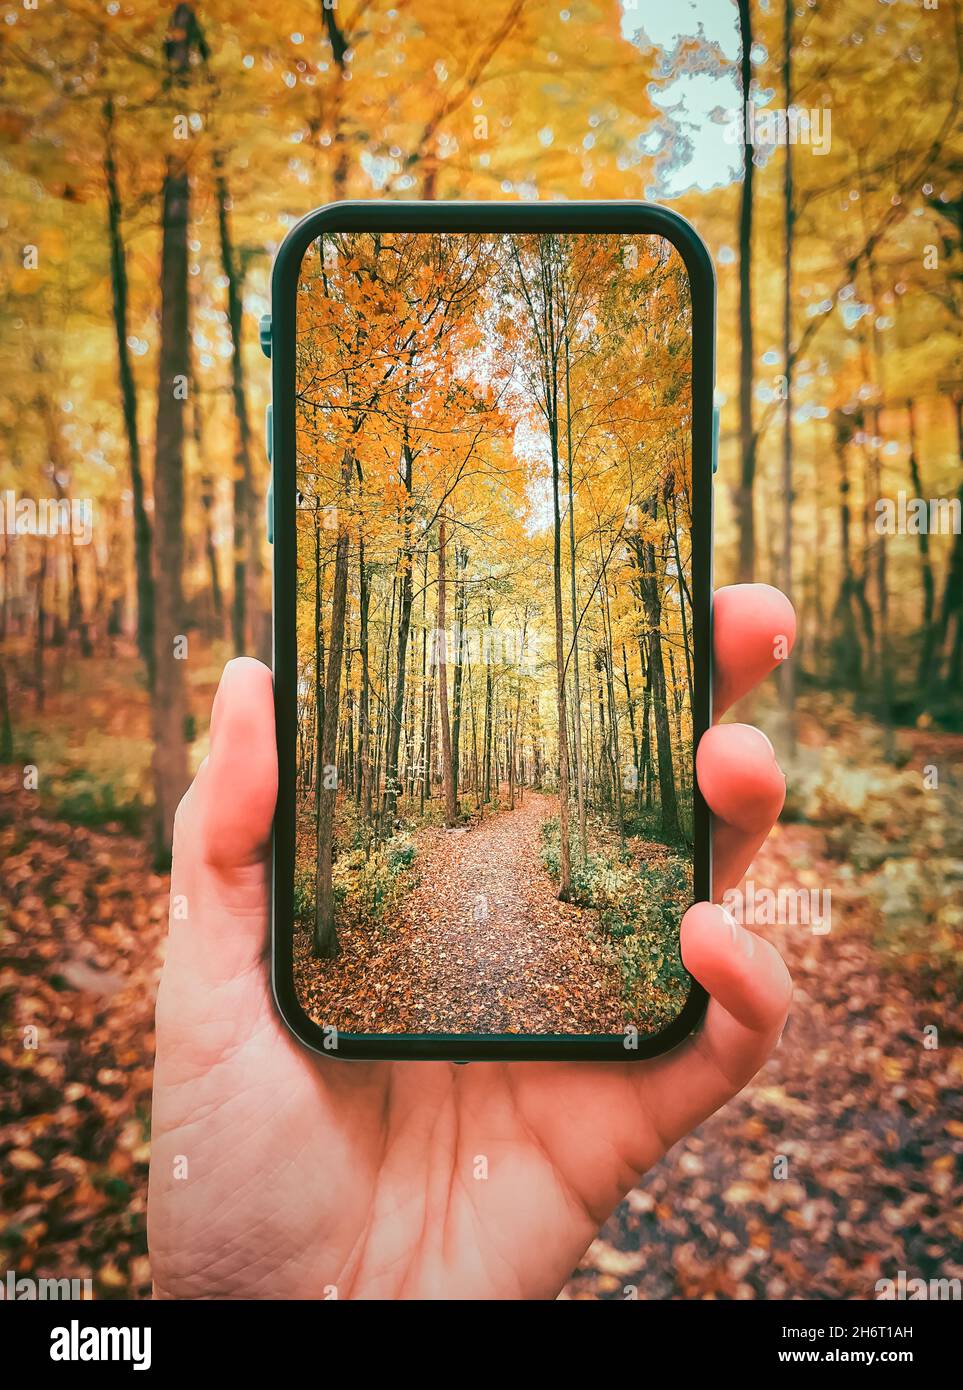 Close up of hand holding cellphone with autumn forest scene on screen. Stock Photo